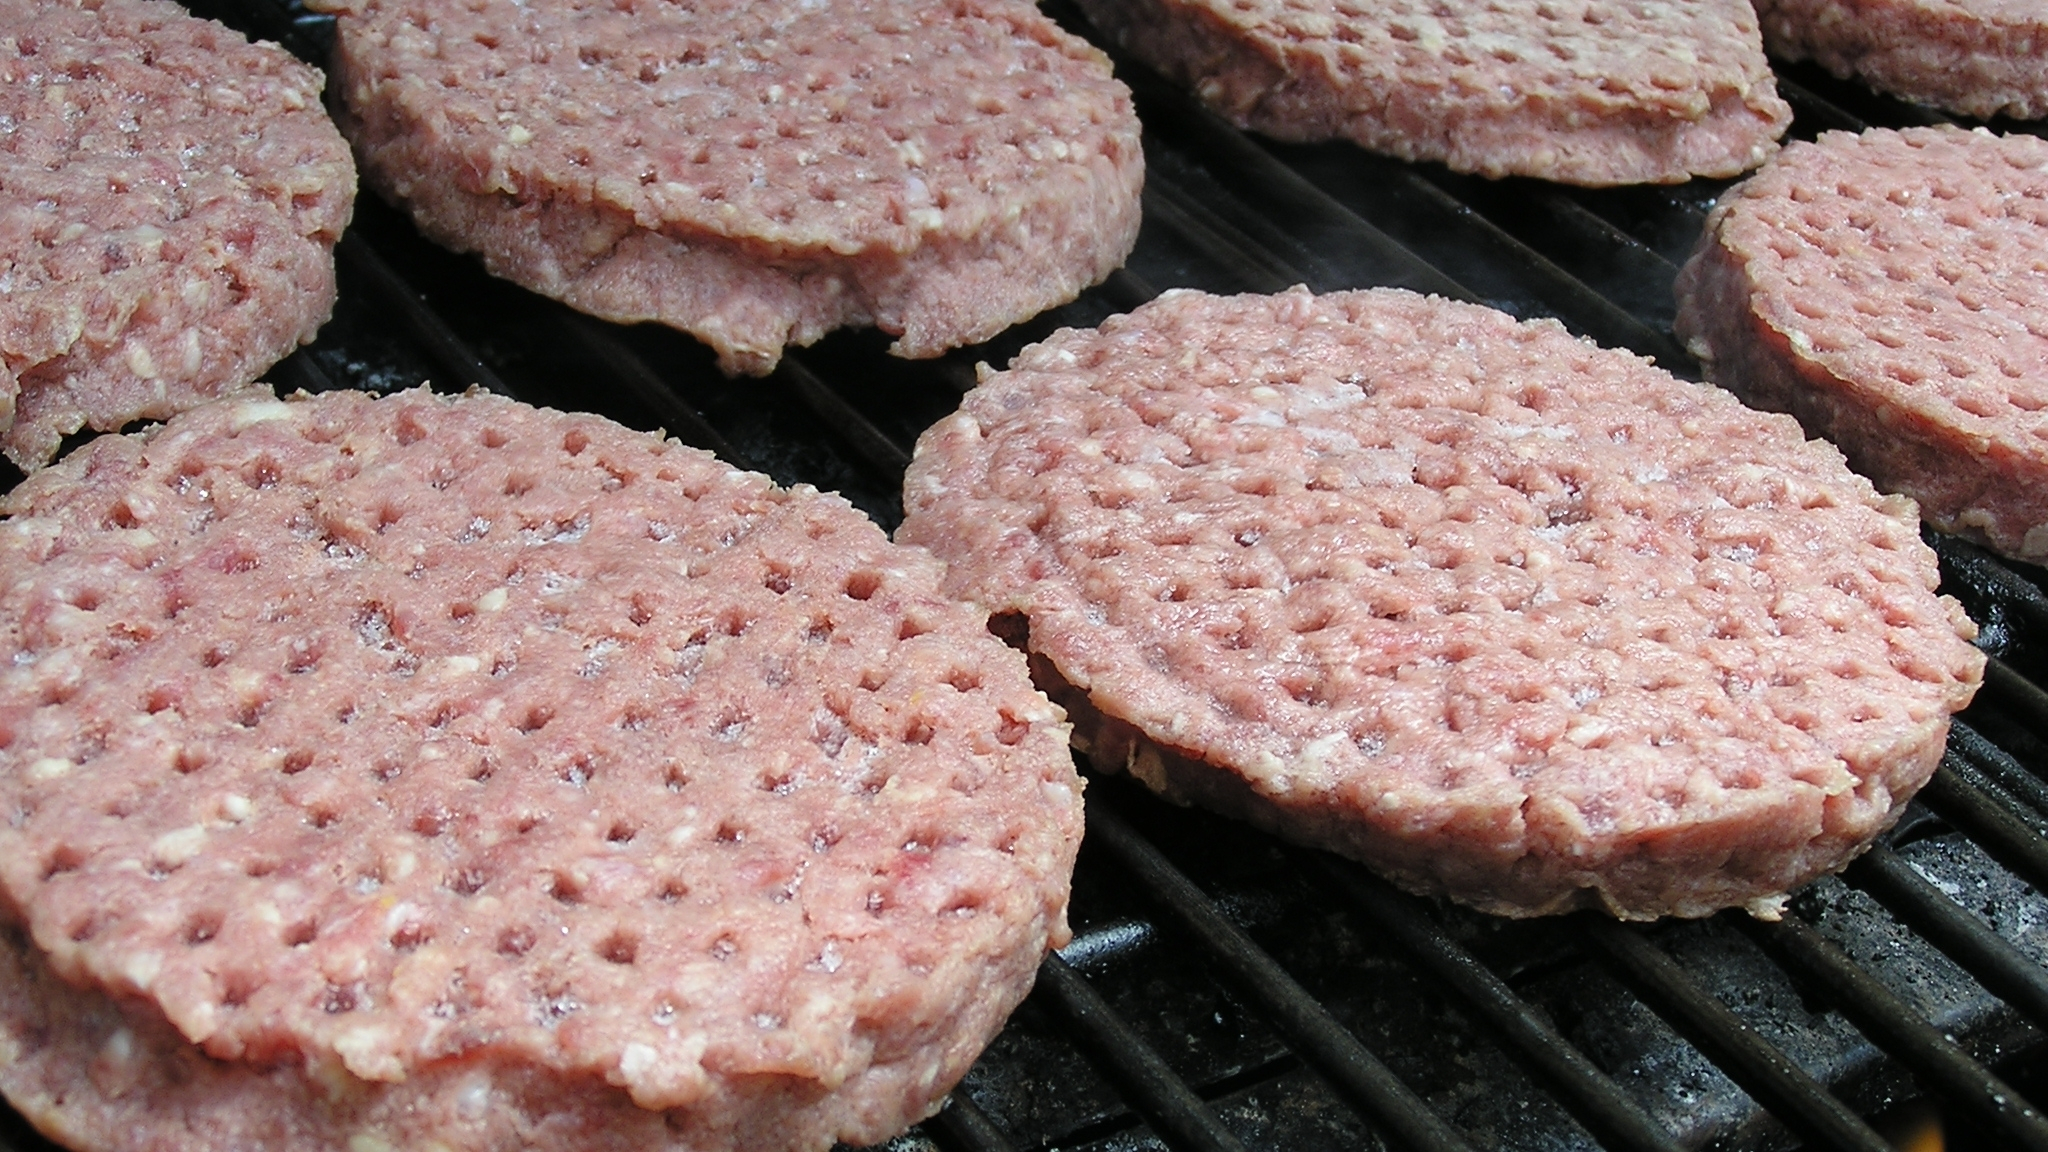 How to grill frozen burgers